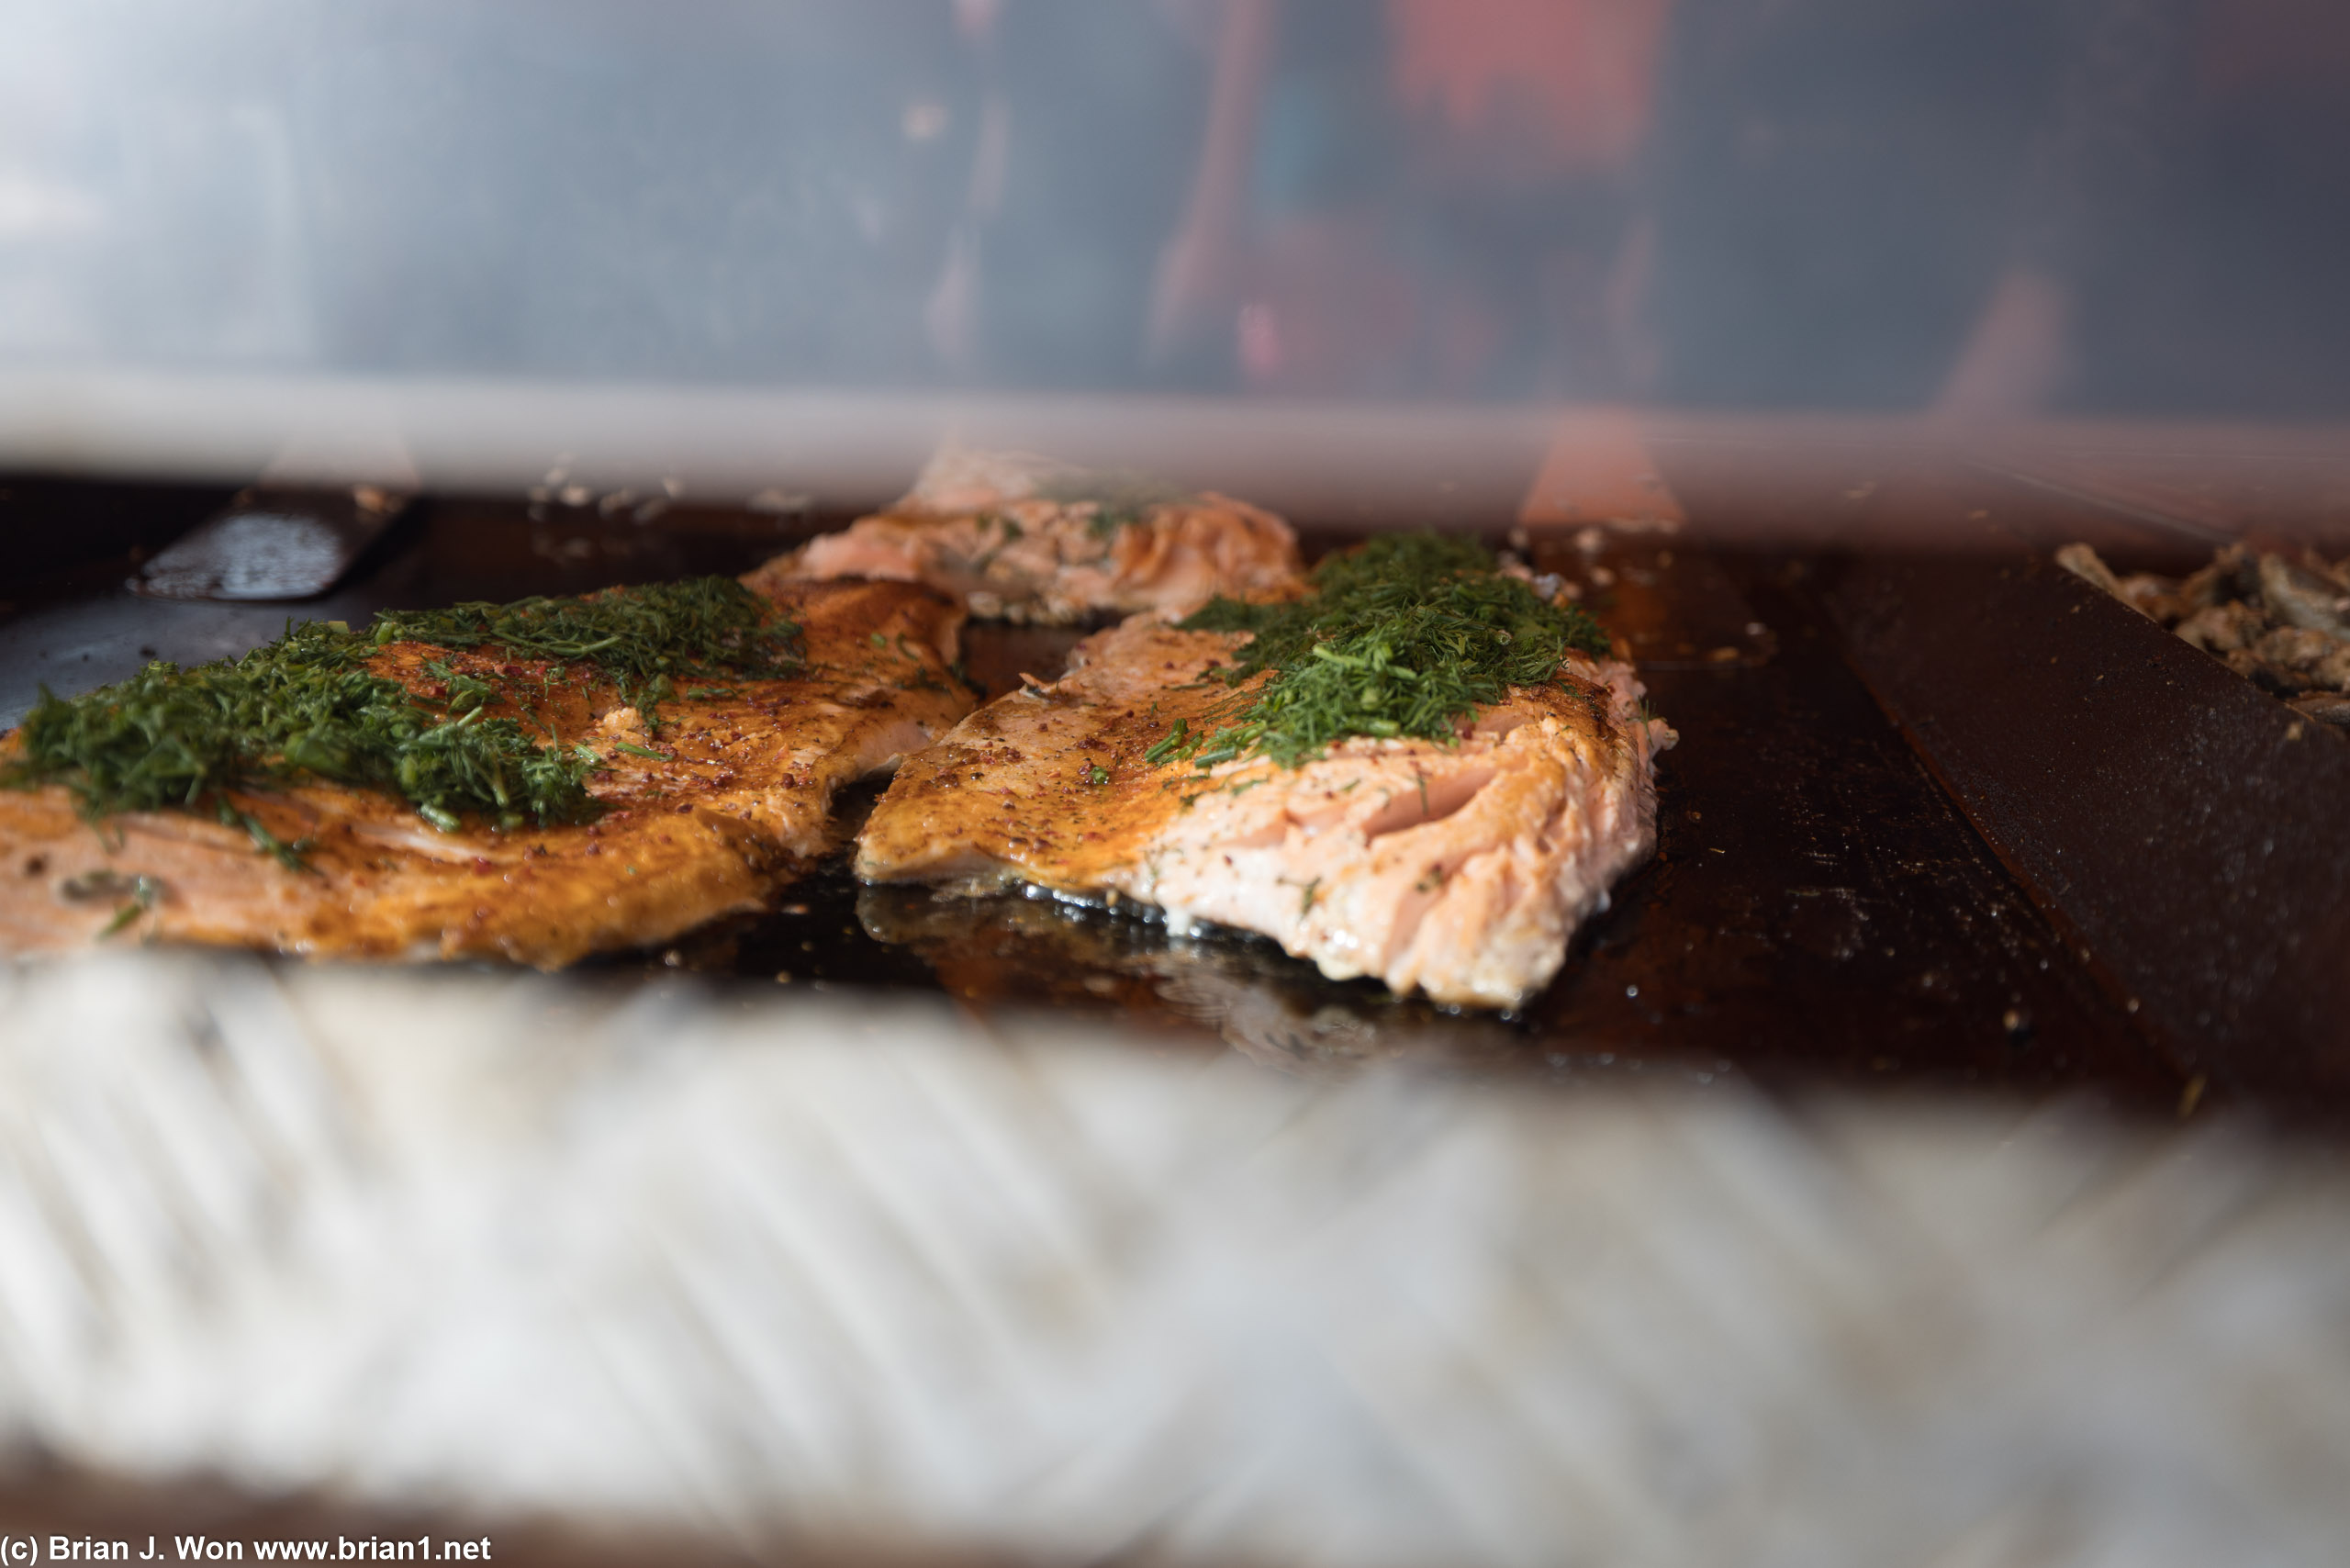 Salmon on the grill.